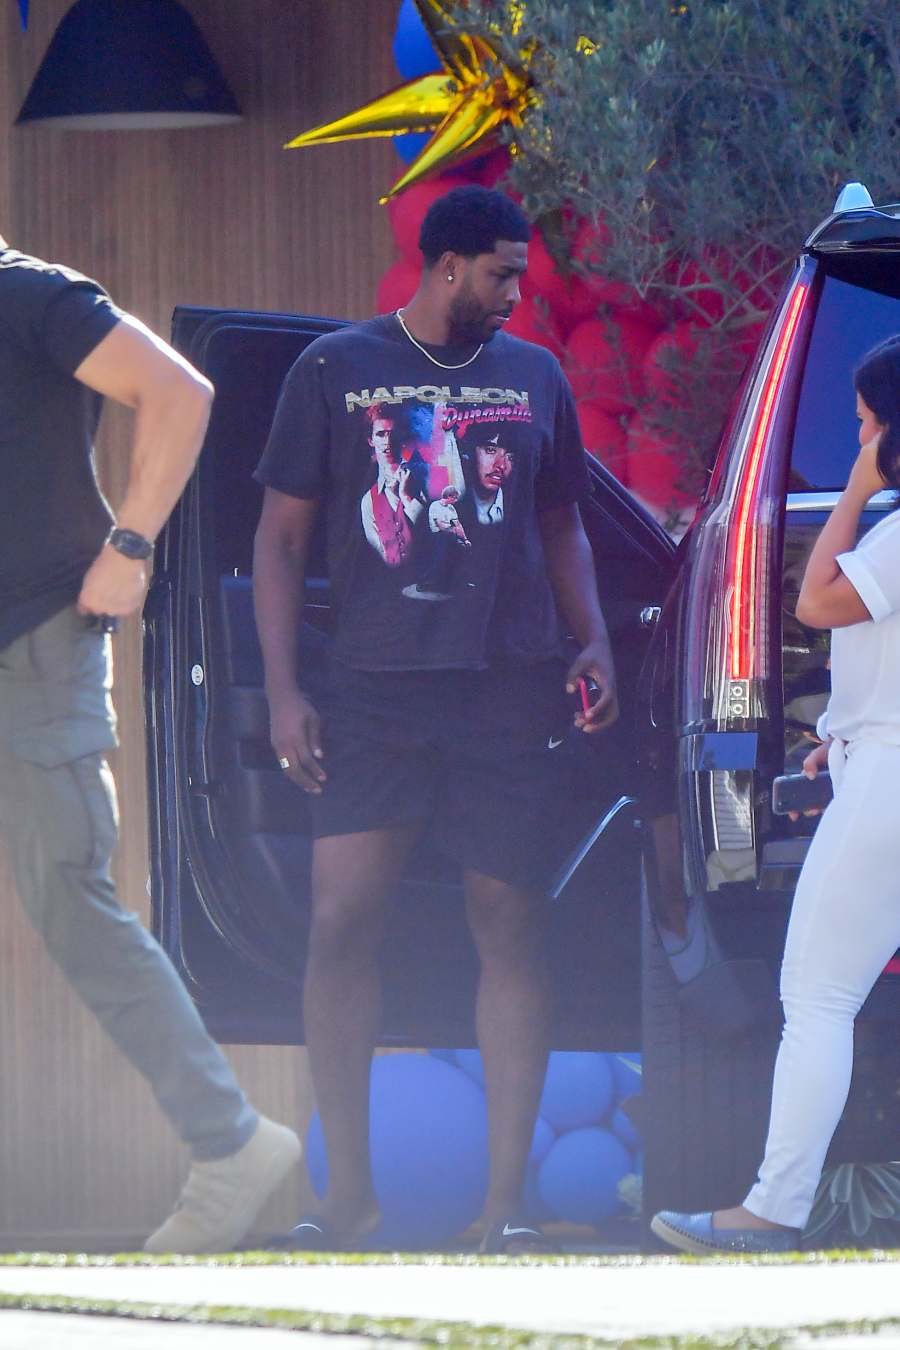 Khloe and Kourtney Kardashian Kris Jenner Attend July 4 Party at Tristan Thompson s L A Home